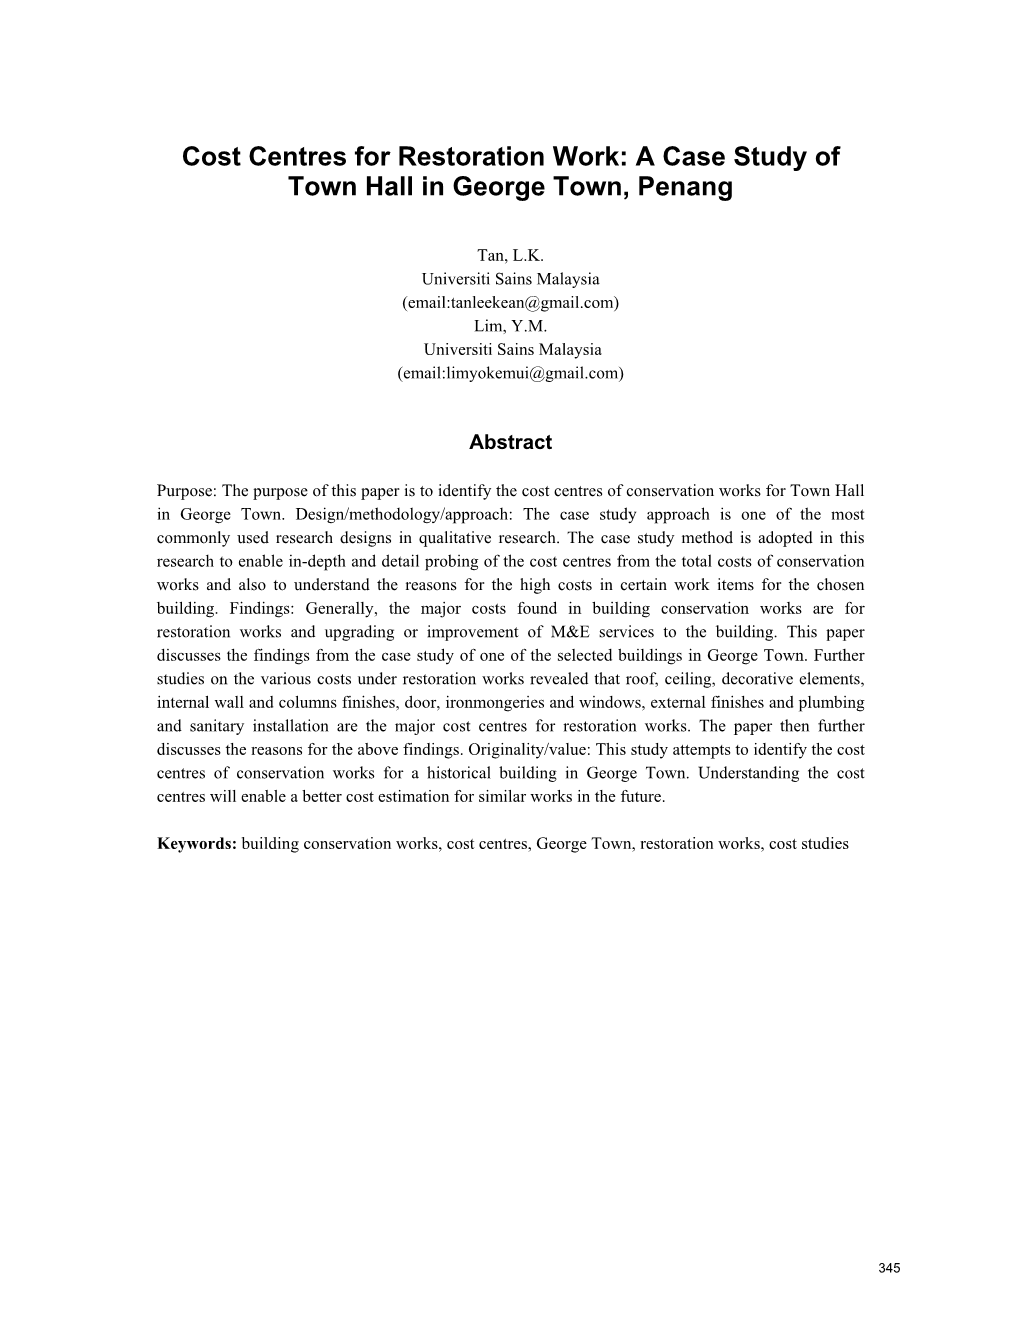 Cost Centres for Restoration Work: a Case Study of Town Hall in George Town, Penang